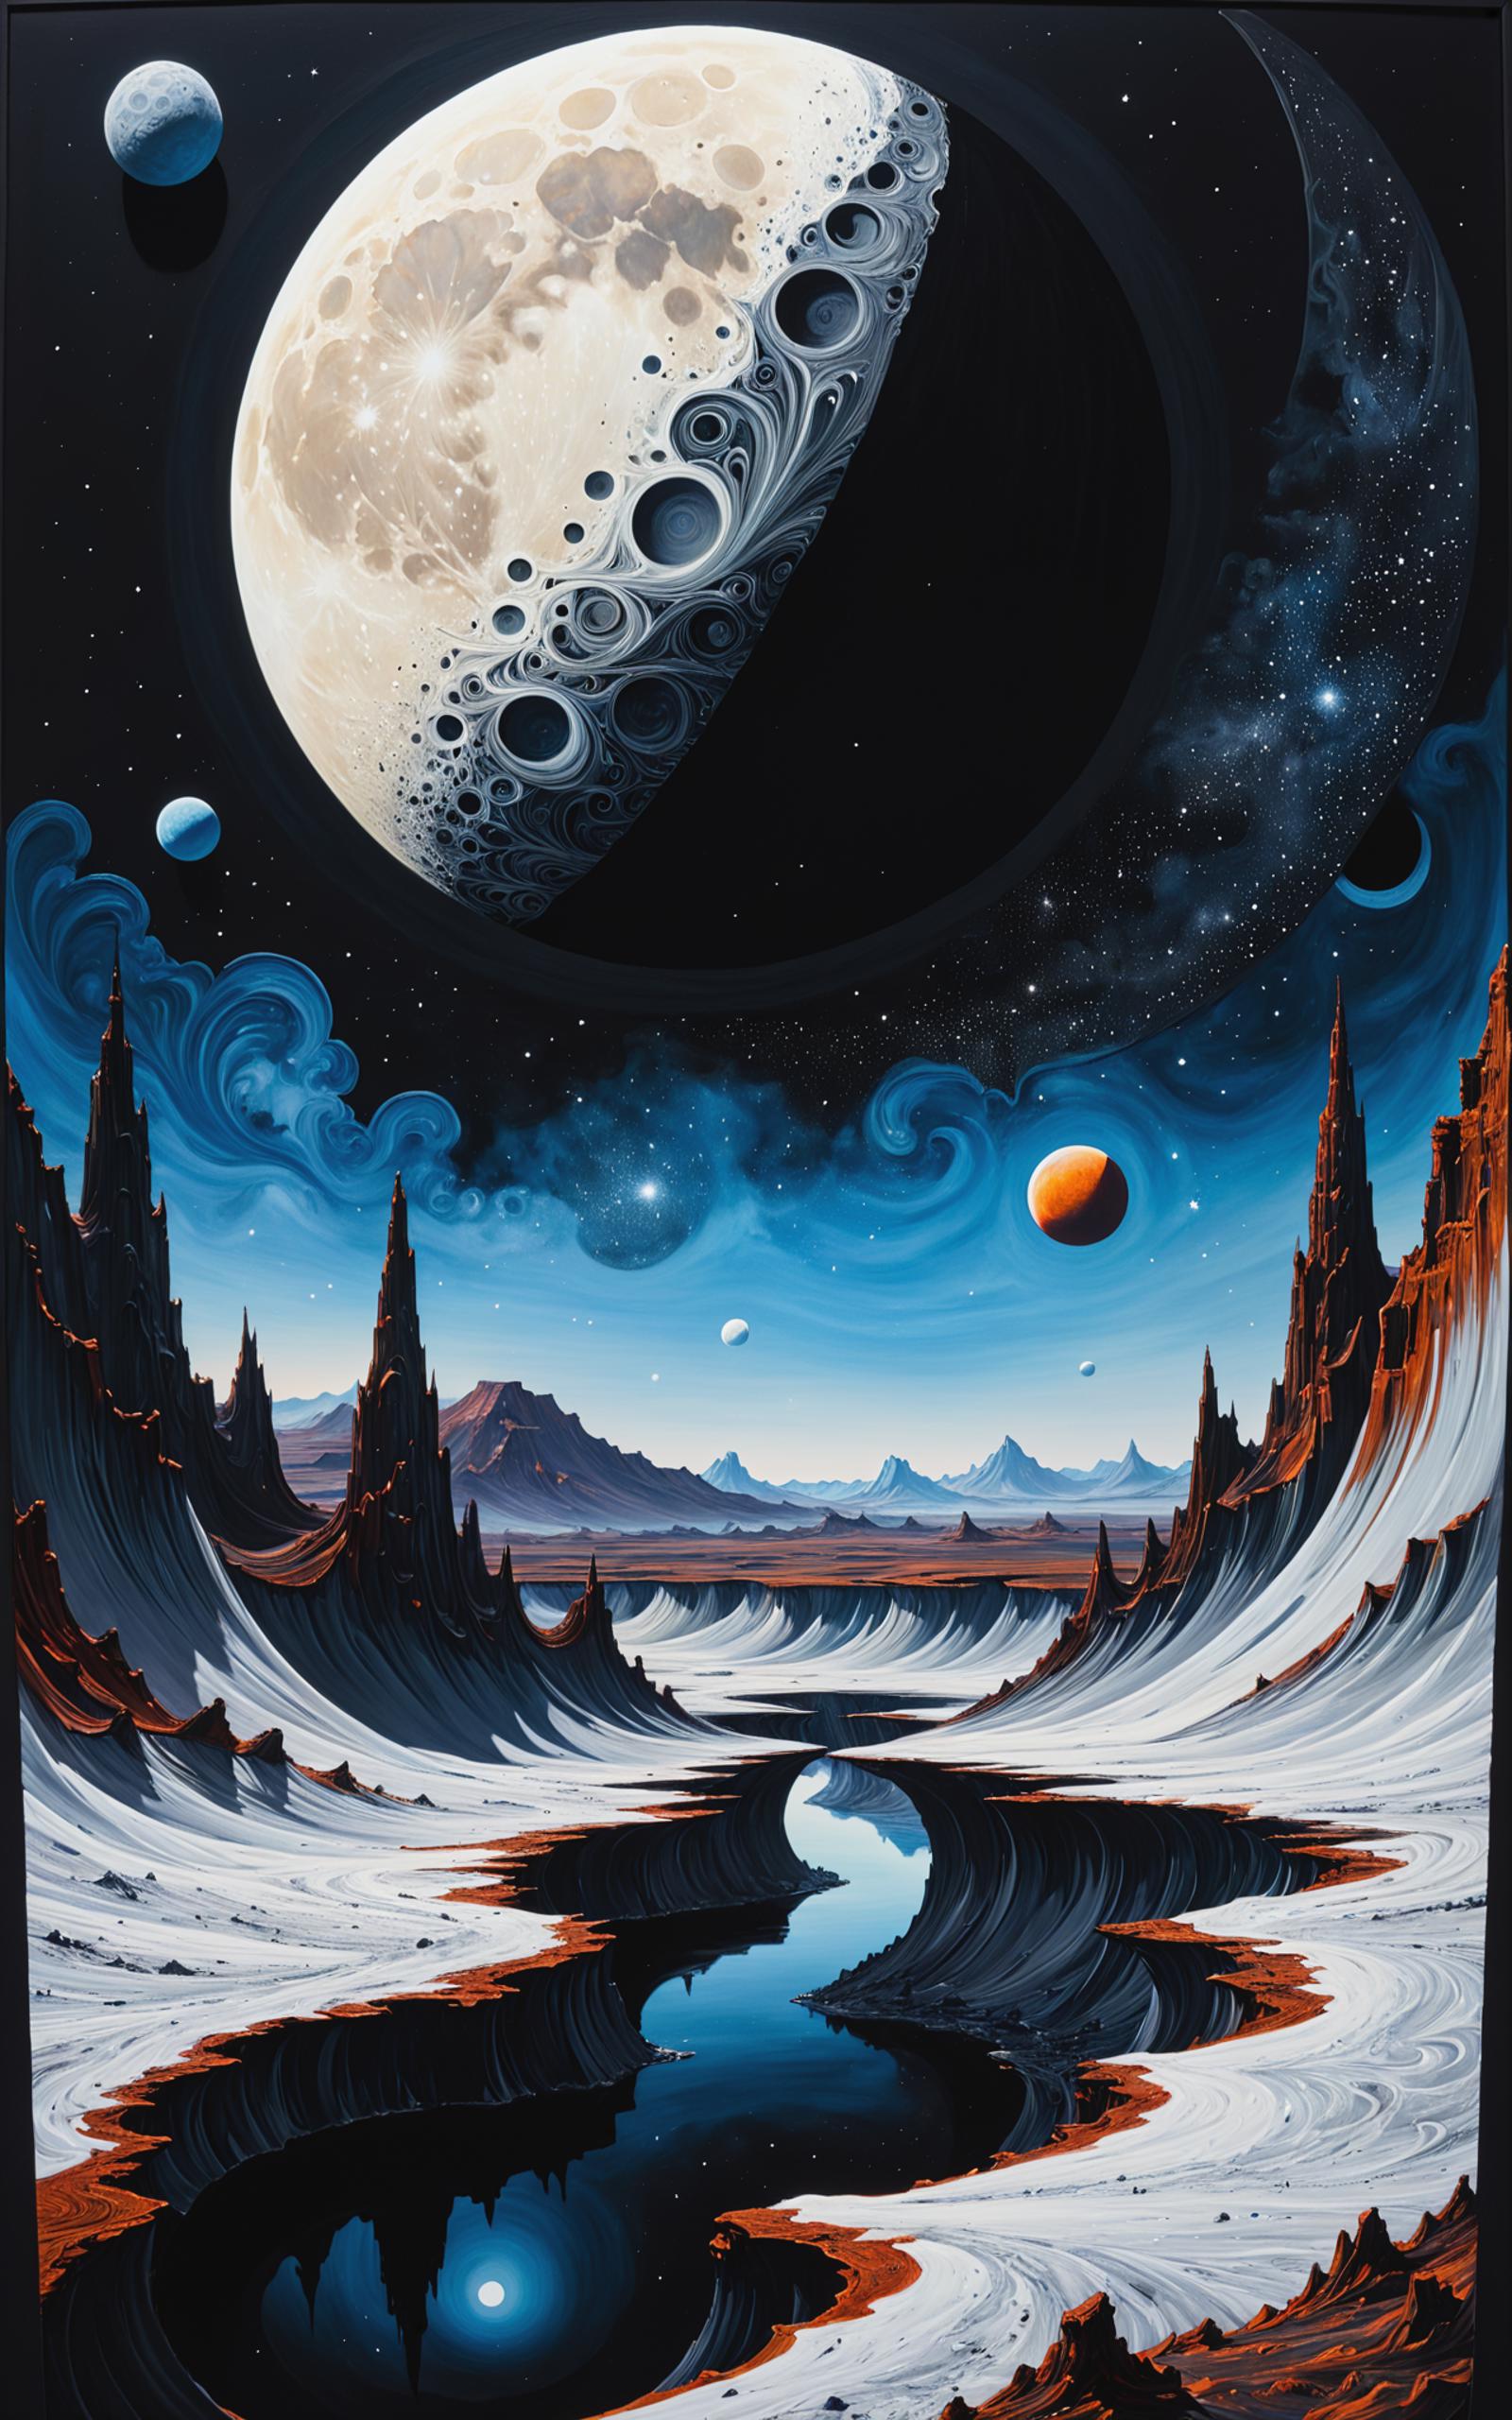 Artistic Space Scene with Planets, Mountains, and a Moonlit Sky